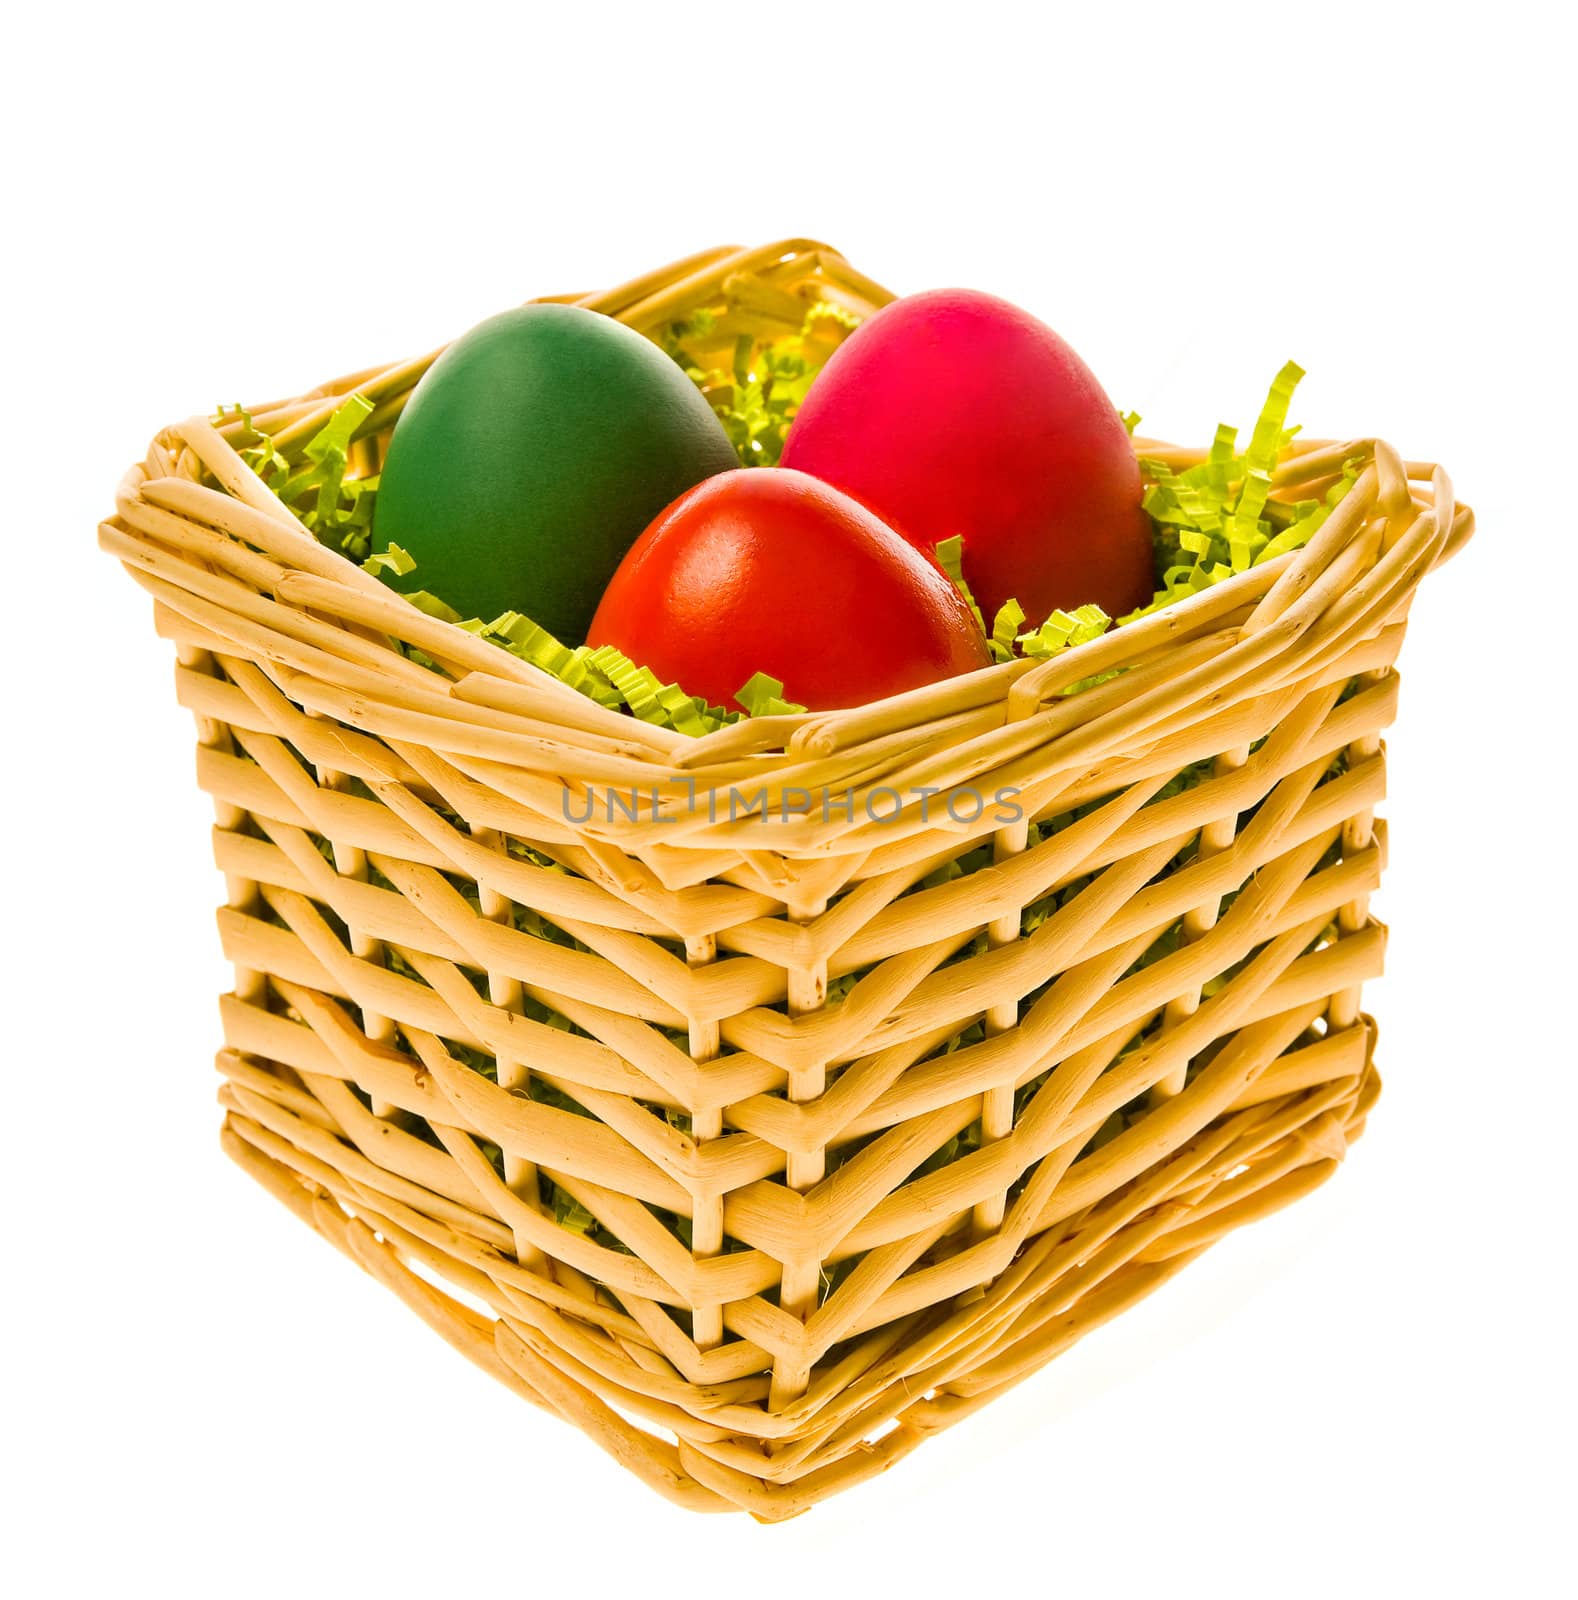 Multi-coloured eggs in a basket by Gravicapa